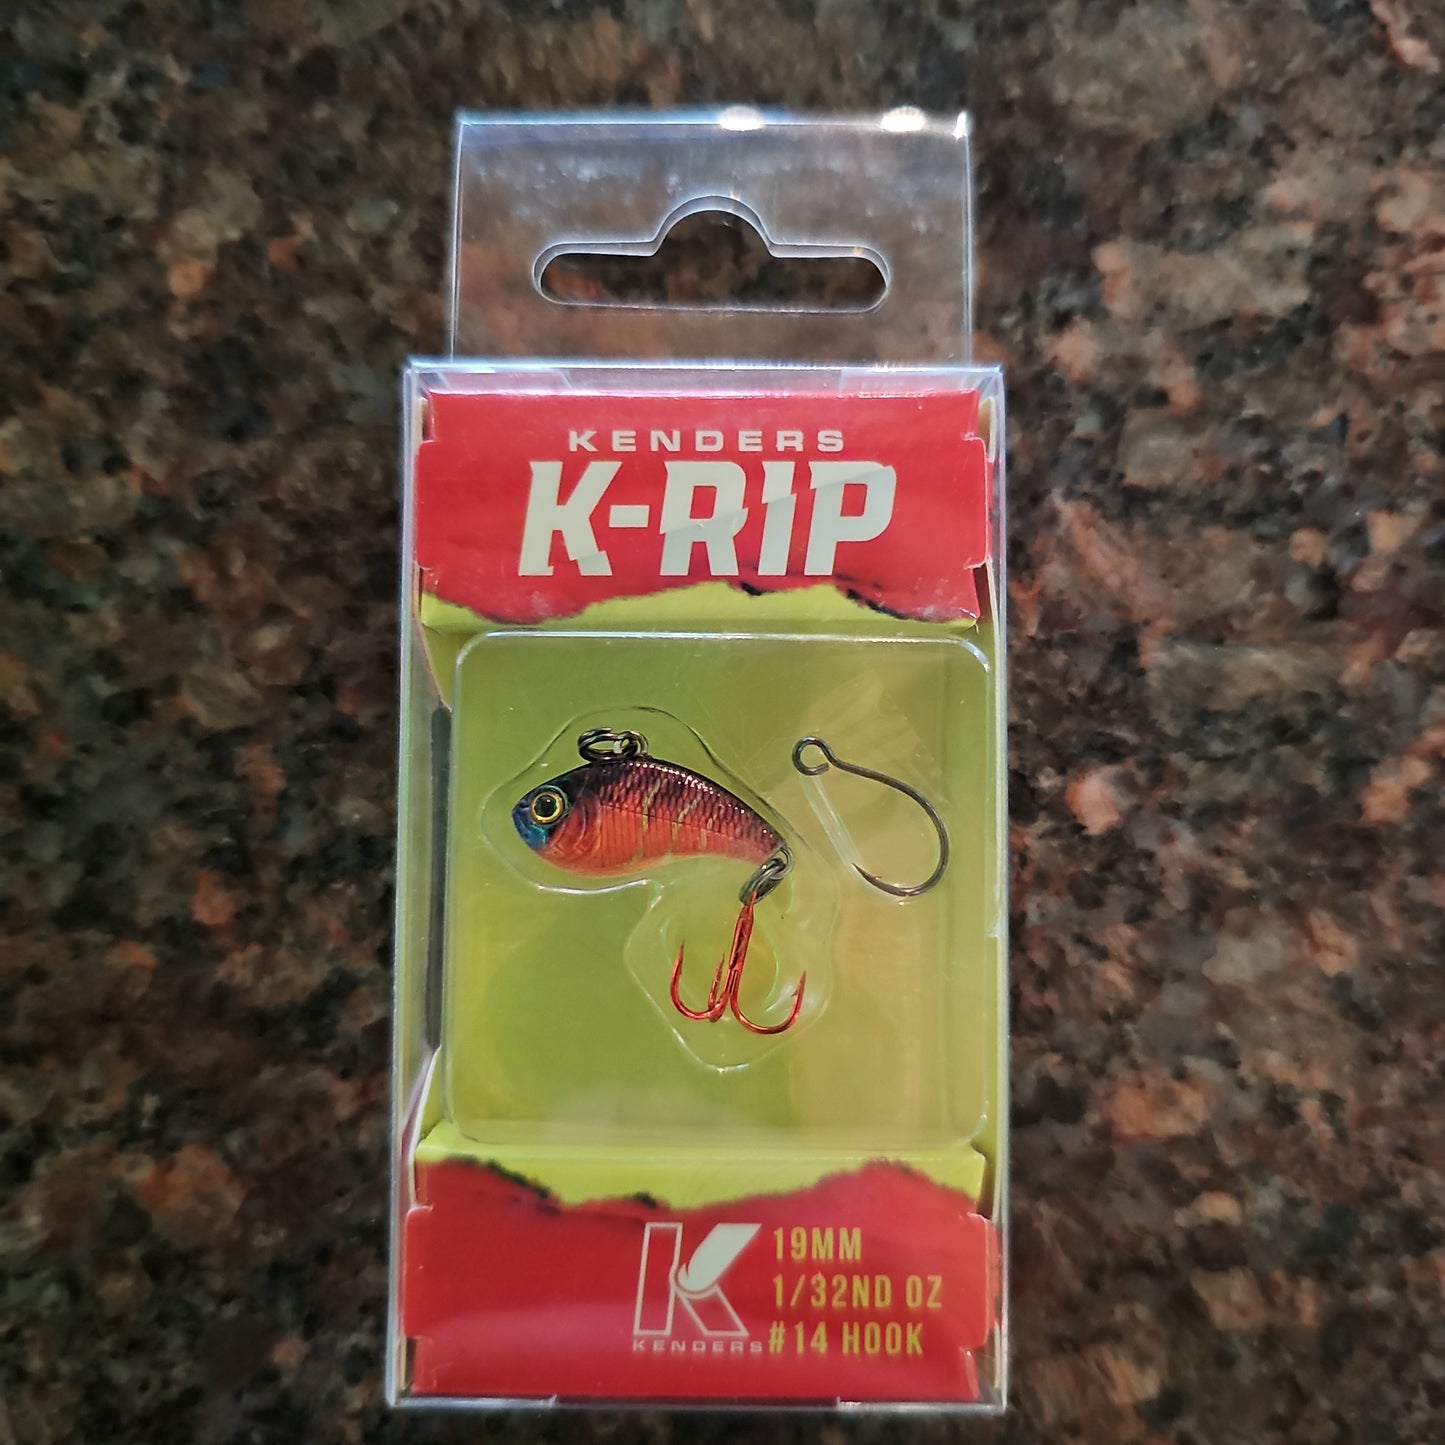 Kenders K-RIP Mini Vibe Lure with Rattle Beads and Treble Hook (Gold Magma, 19mm (3/4") #14 HOOK